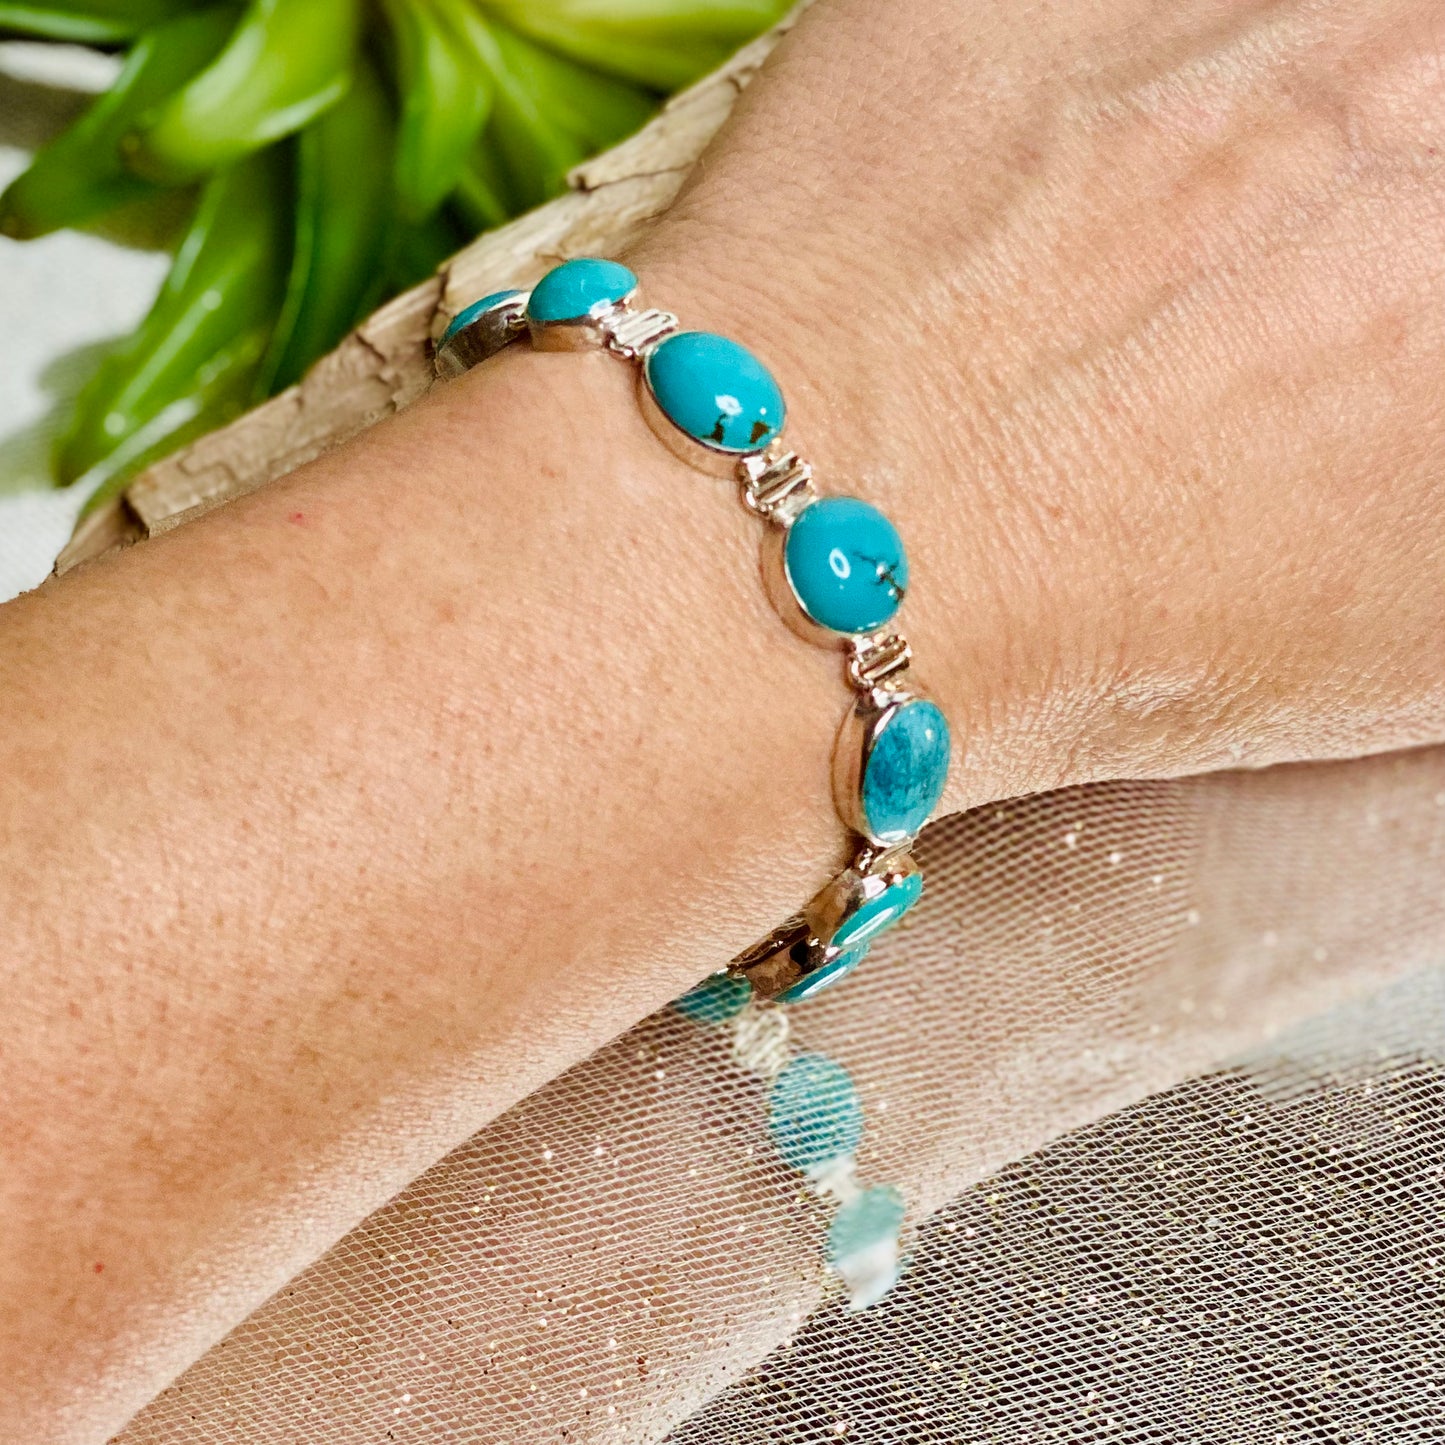 Turquoise Elegance: Sterling Silver Bracelet with 9 Cabochon Stones - Adjustable Length 7 to 8 1/2 inches